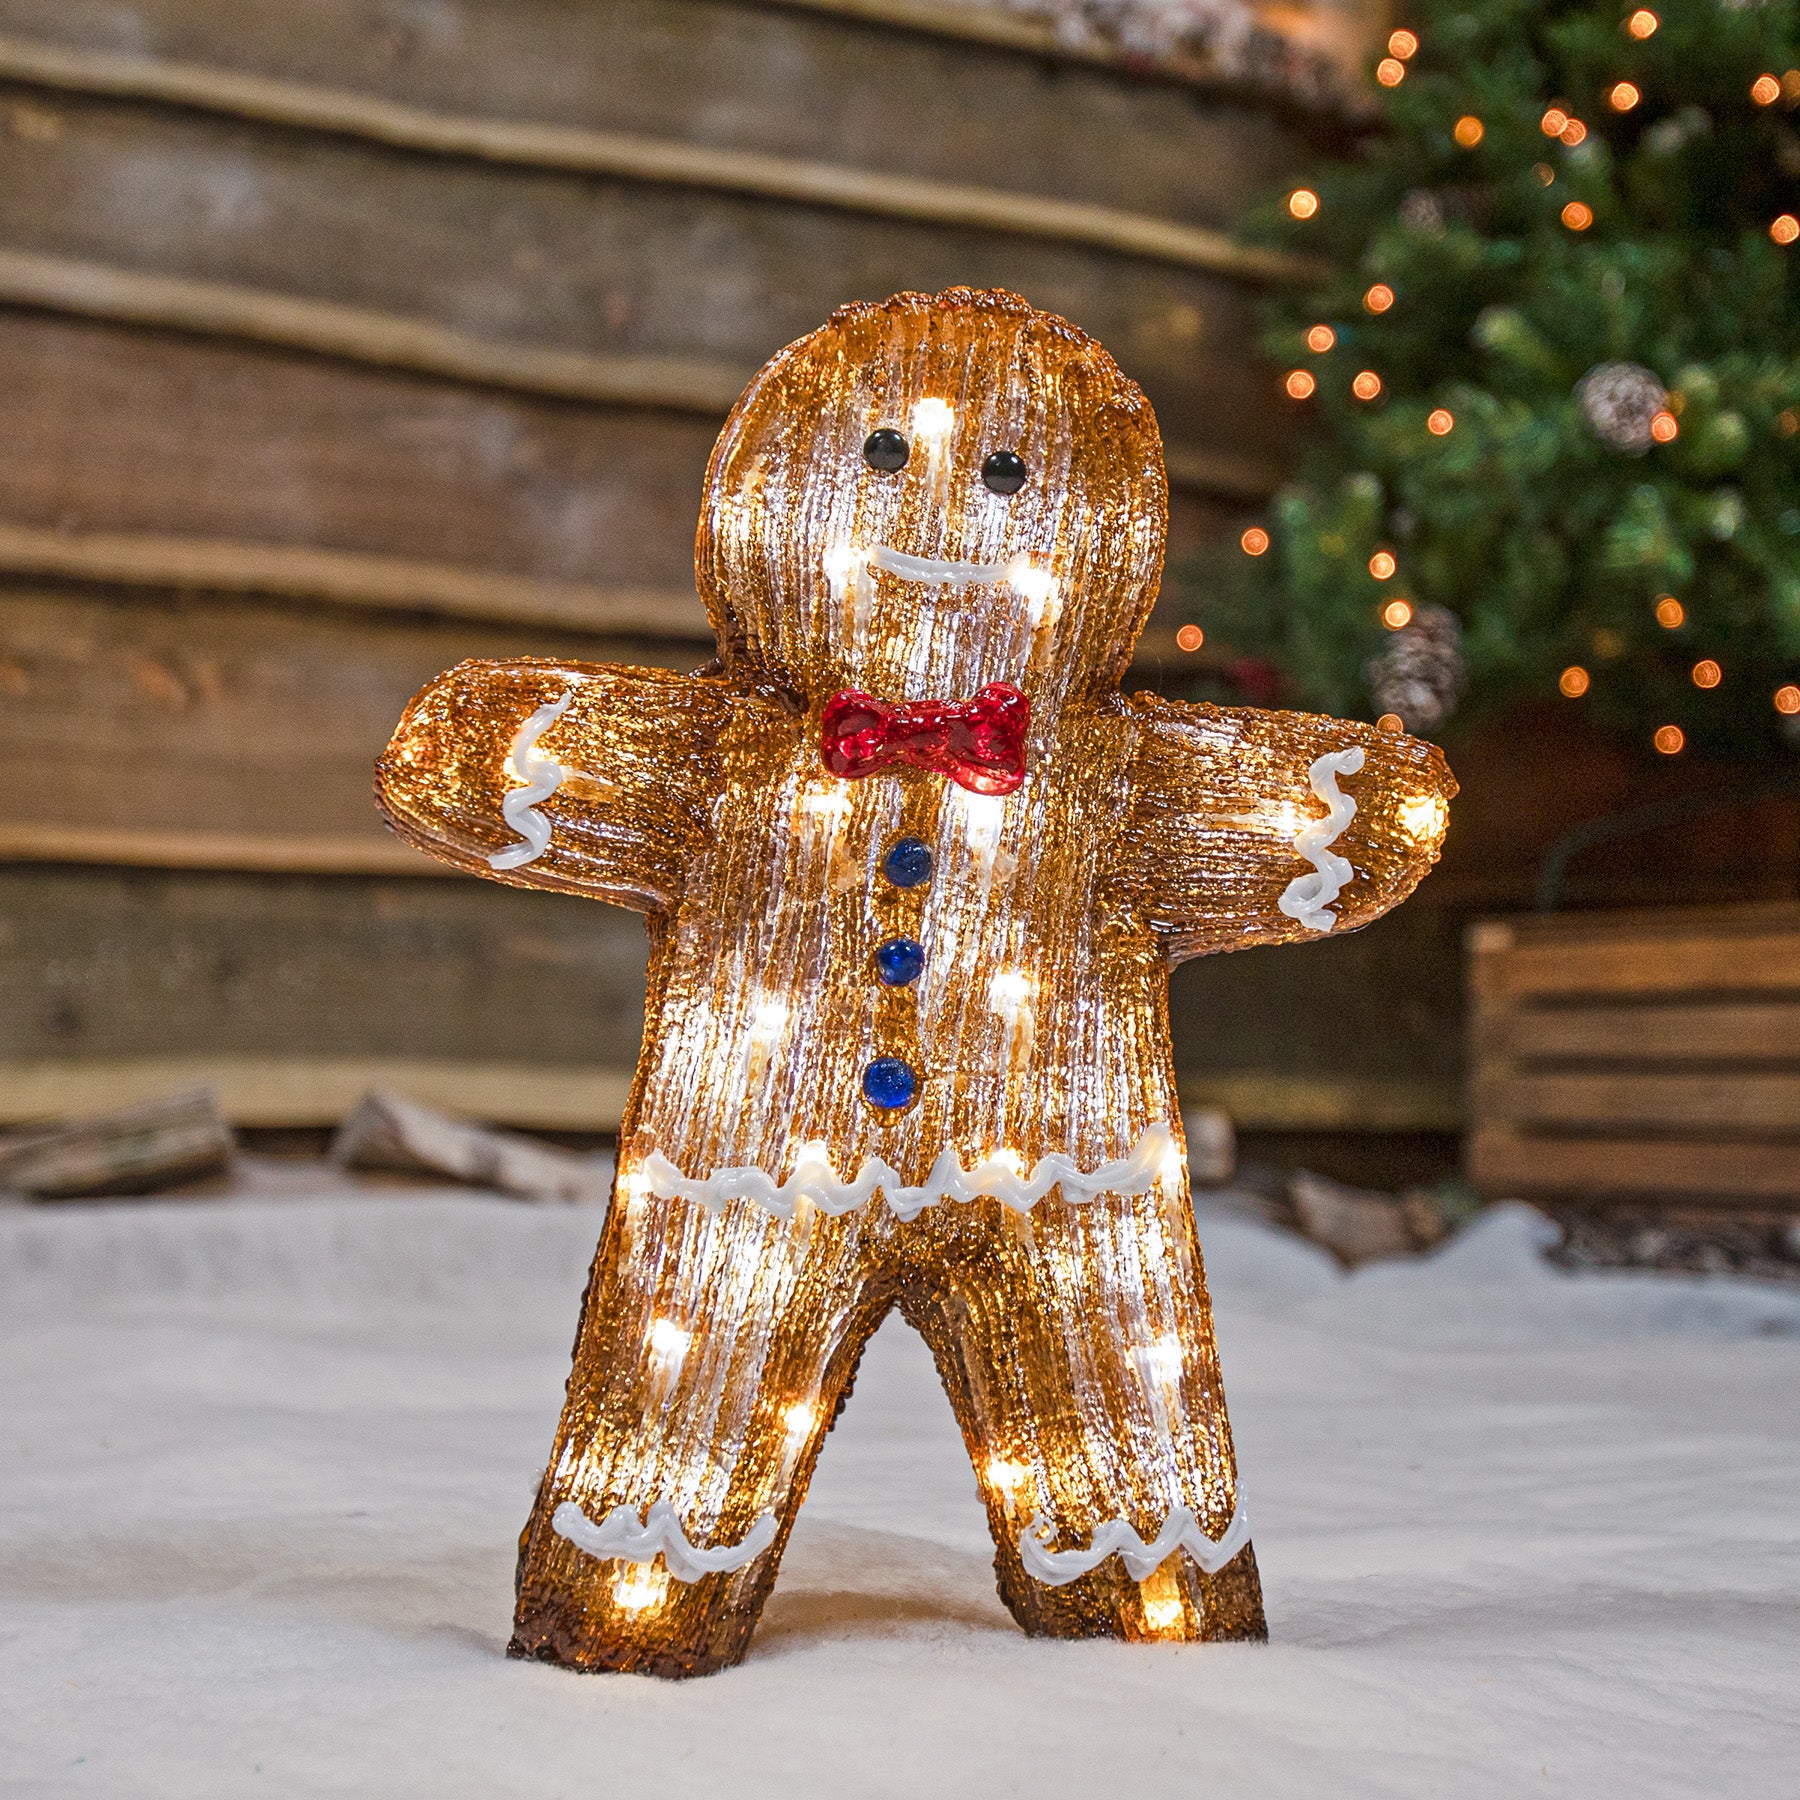 40CM Acrylic Christmas Gingerbread Man with Timer - Garden Trends